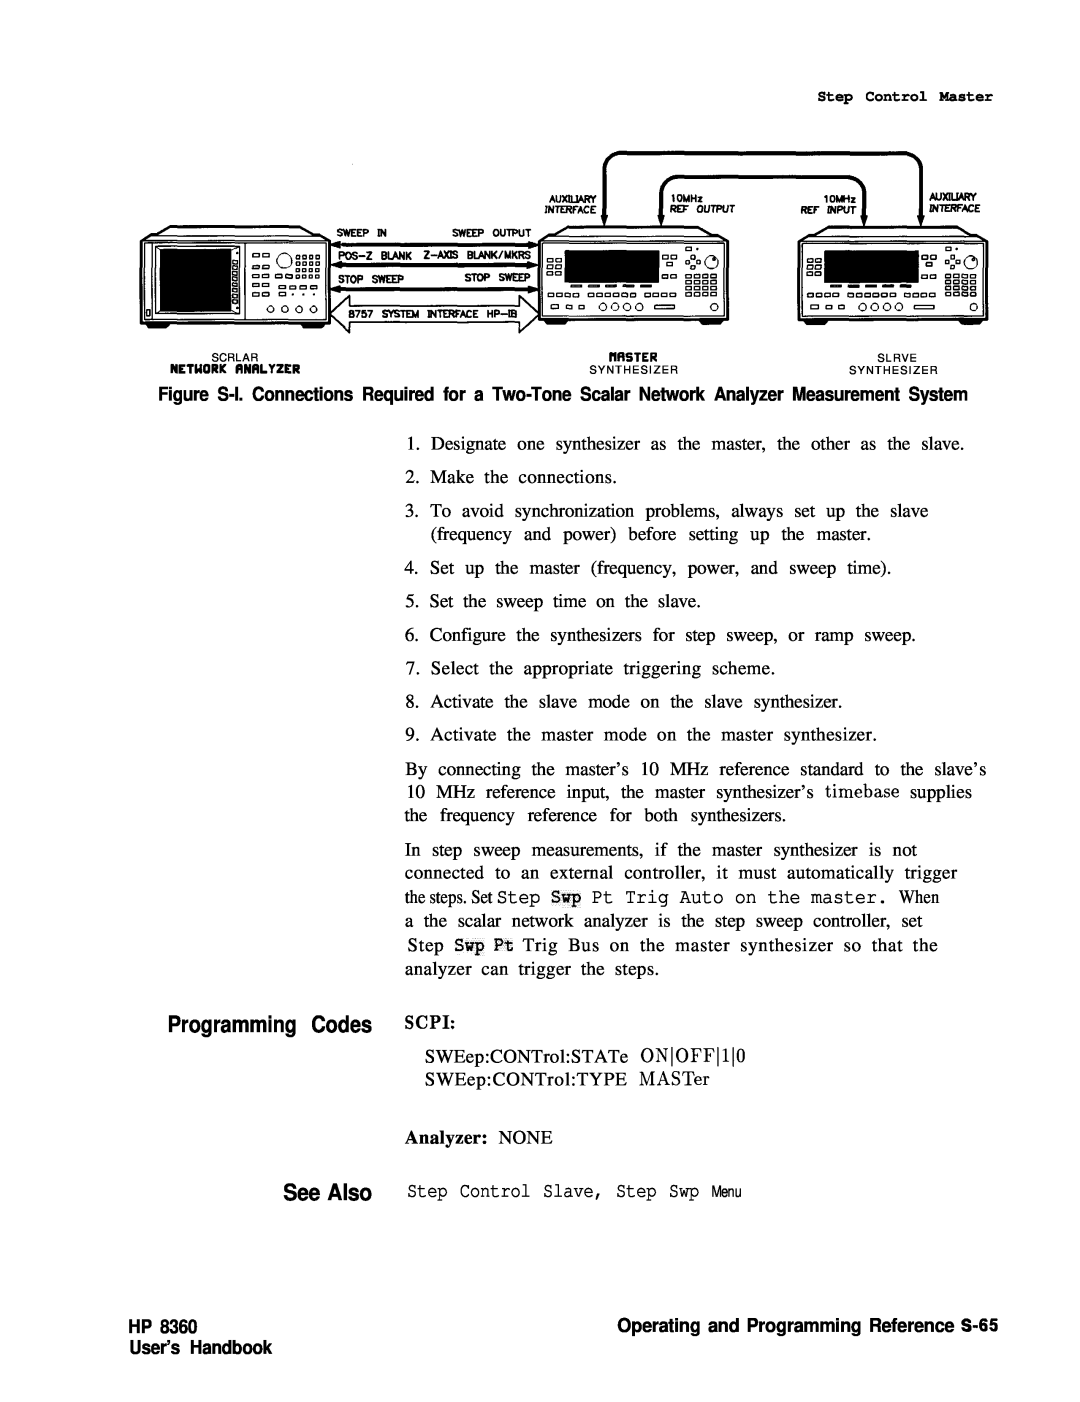 HP 83620A, 24A, 22A manual See Also Step Control Slave, Step Swp Menu, Programming Codes SCPI, Analyzer NONE, User’s Handbook 